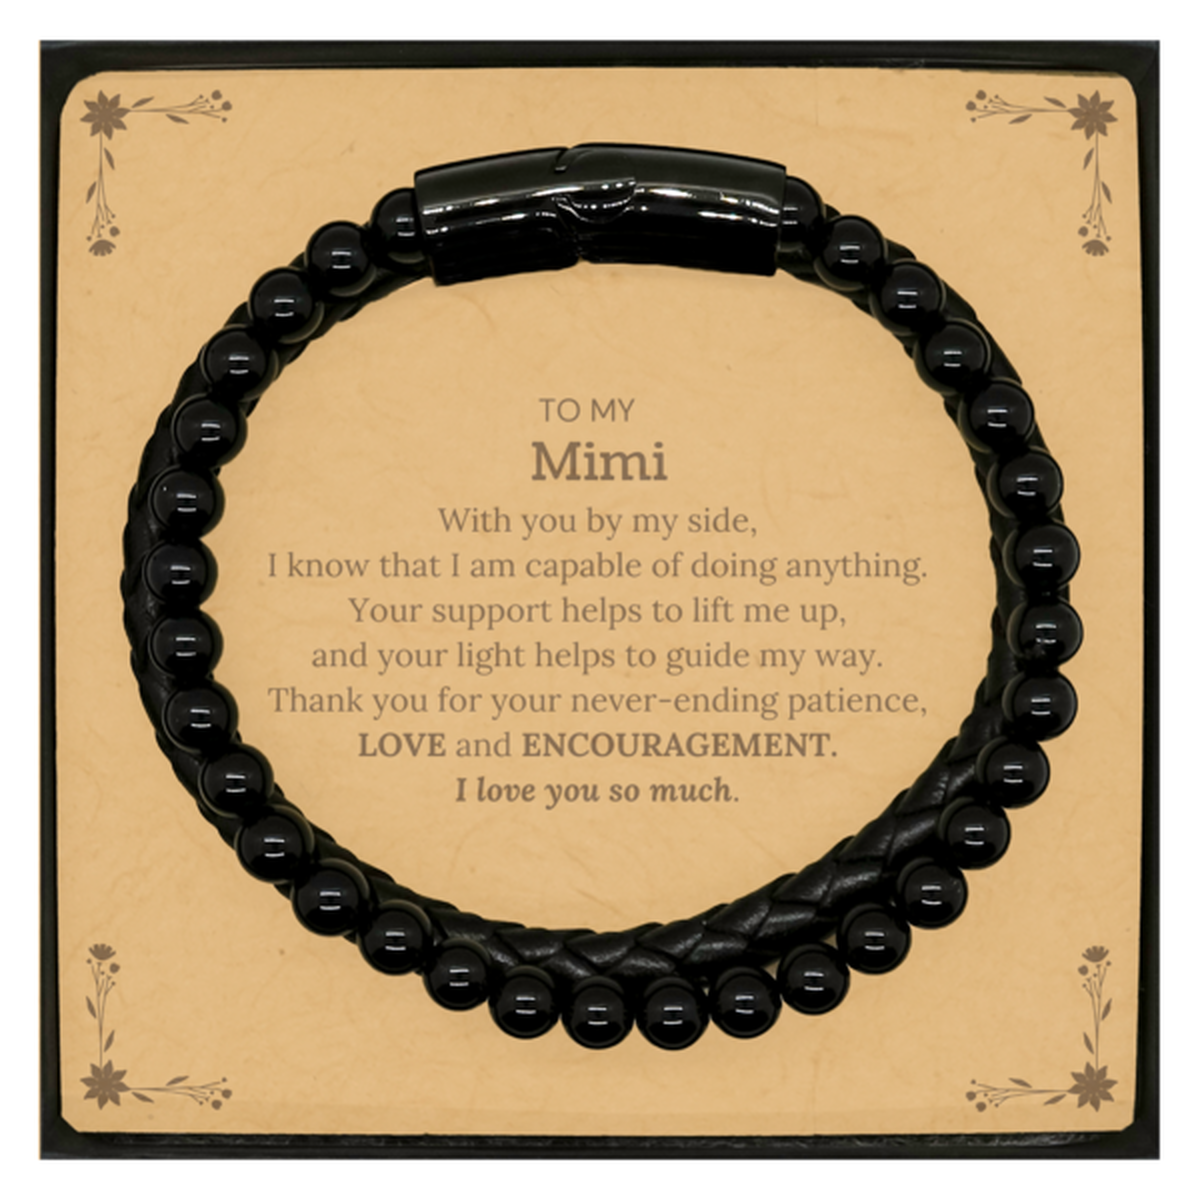 Appreciation Mimi Stone Leather Bracelets Gifts, To My Mimi Birthday Christmas Wedding Keepsake Gifts for Mimi With you by my side, I know that I am capable of doing anything. I love you so much